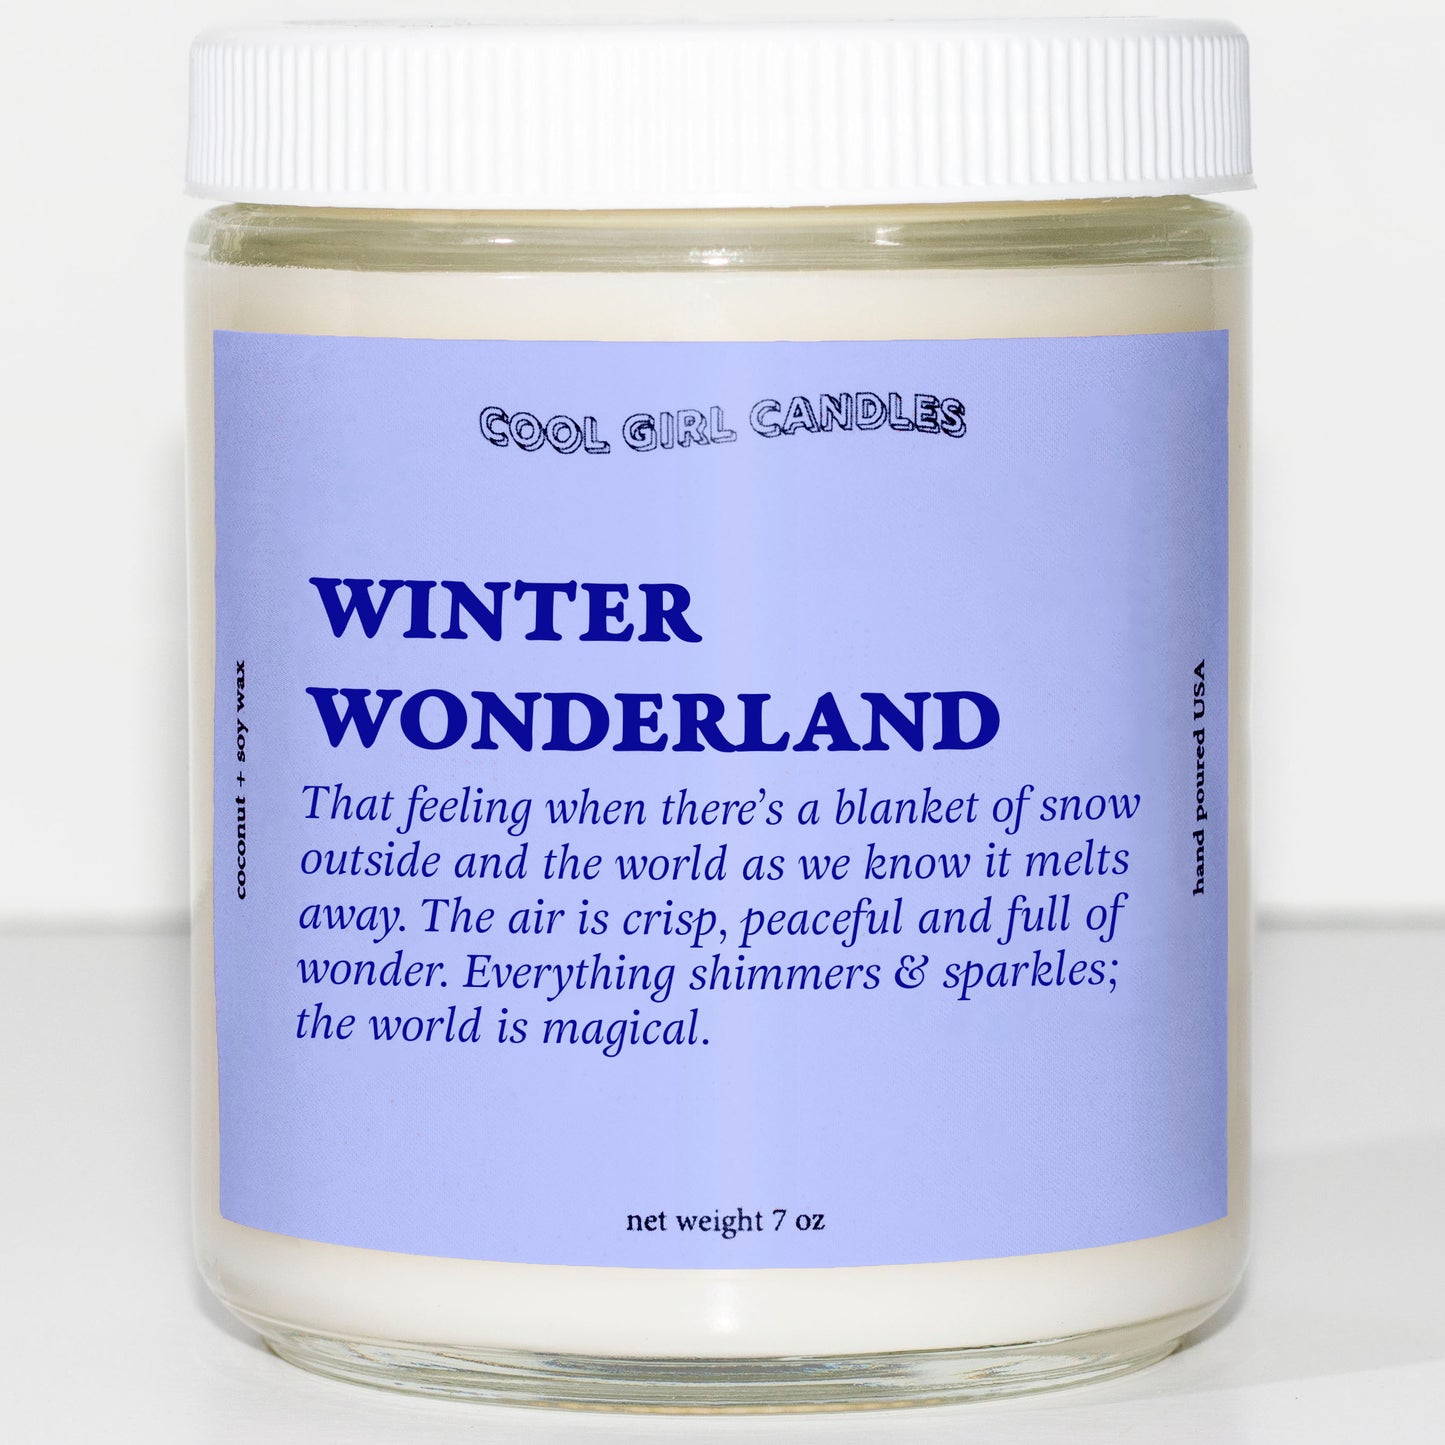 Winter wonderland candle by cool girl candles a blue colored holiday candle that's the perfect festive gift for the holidays